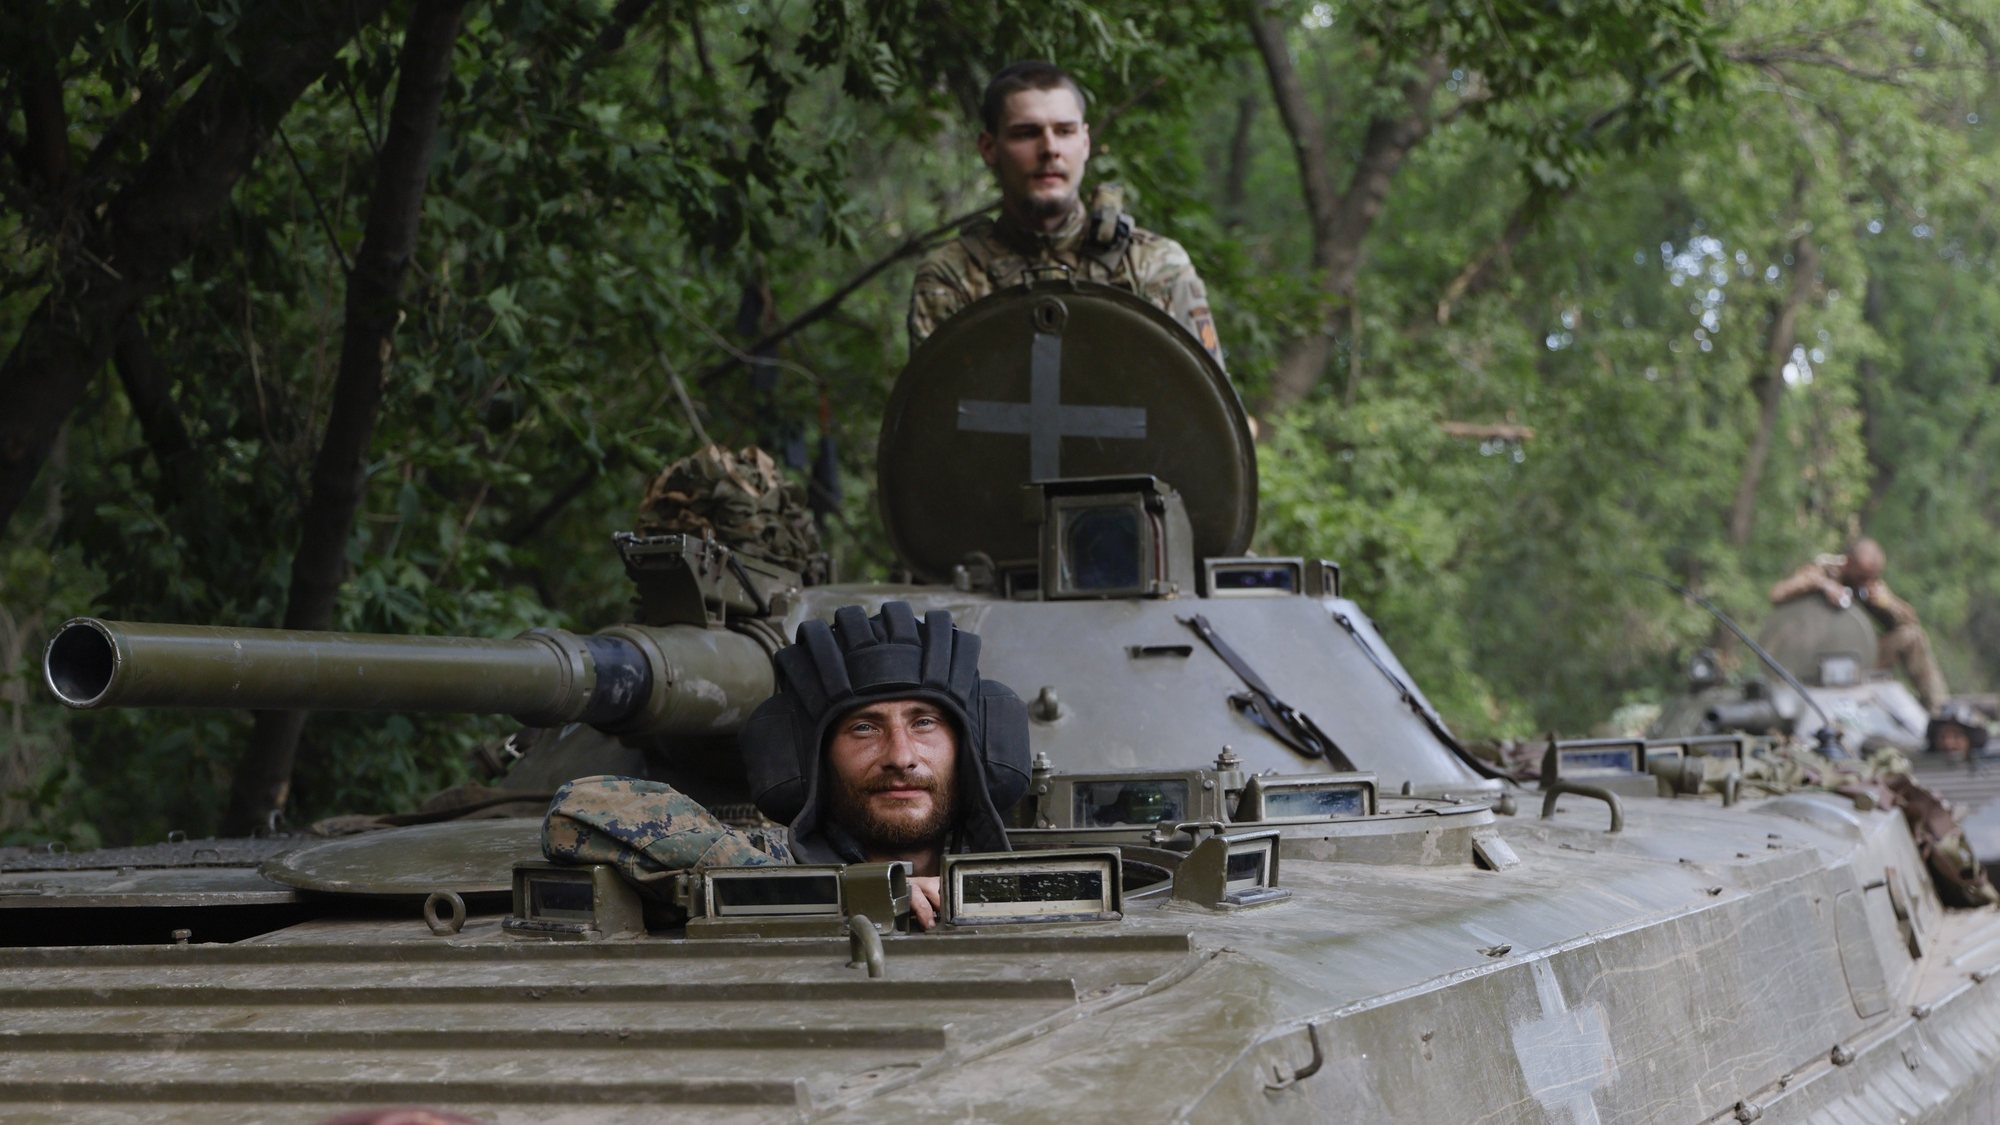 epa10722097 Ukrainian servicemen from the 3rd Separate Assault Brigade ride an armoured personnel carrier (APC) at a road near the frontline city of Bakhmut, Donetsk region, eastern Ukraine, 01 July 2023 (issued 02 July 2023), amid the Russian invasion. The frontline city of Bakhmut, a key target for Russian forces, has seen heavy fighting for months. Russian troops entered Ukrainian territory in February 2022, starting a conflict that has provoked destruction and a humanitarian crisis.  EPA/ALEX BABENKO